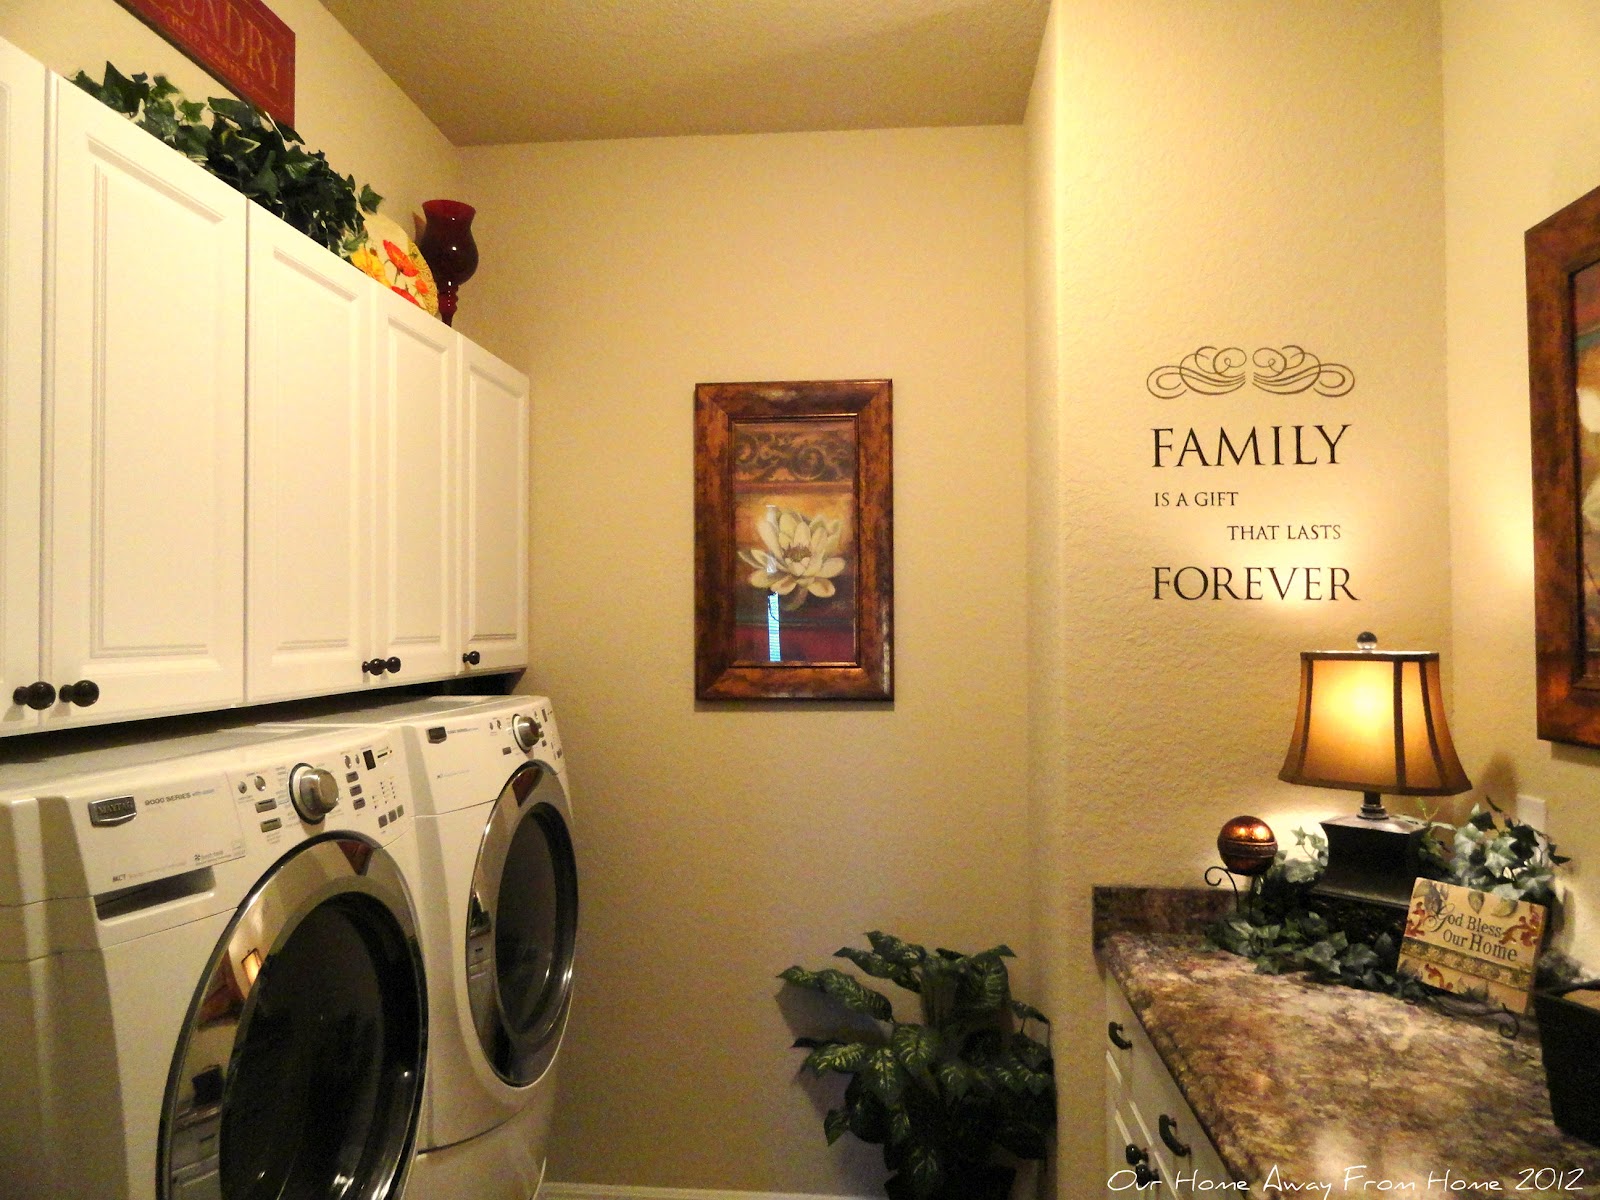 Our Home Away From Home: IN THE LAUNDRY ROOM